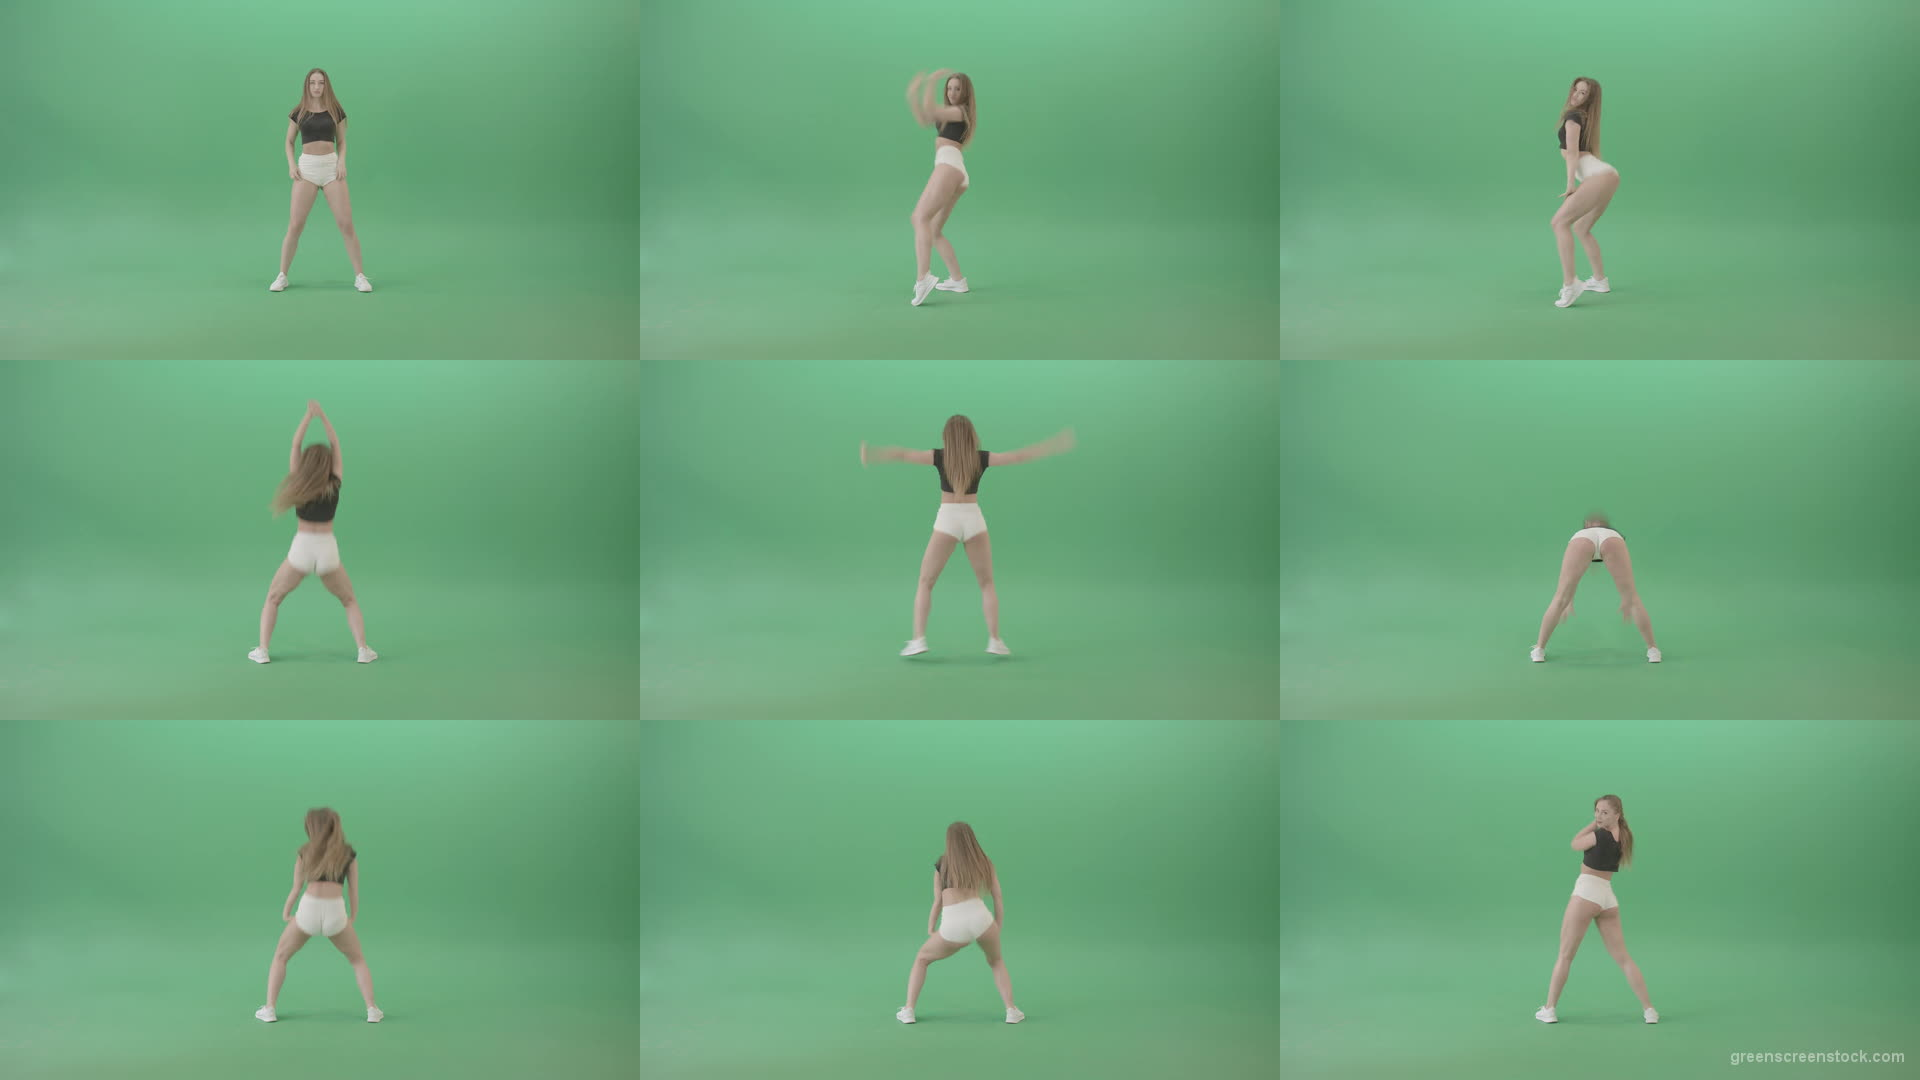 Beauty-girl-sрaking-ass-and-hips-dancing-Twerk-Afro-Dance-isolated-on-green-screen-4K-Video-Footage-1920 Green Screen Stock